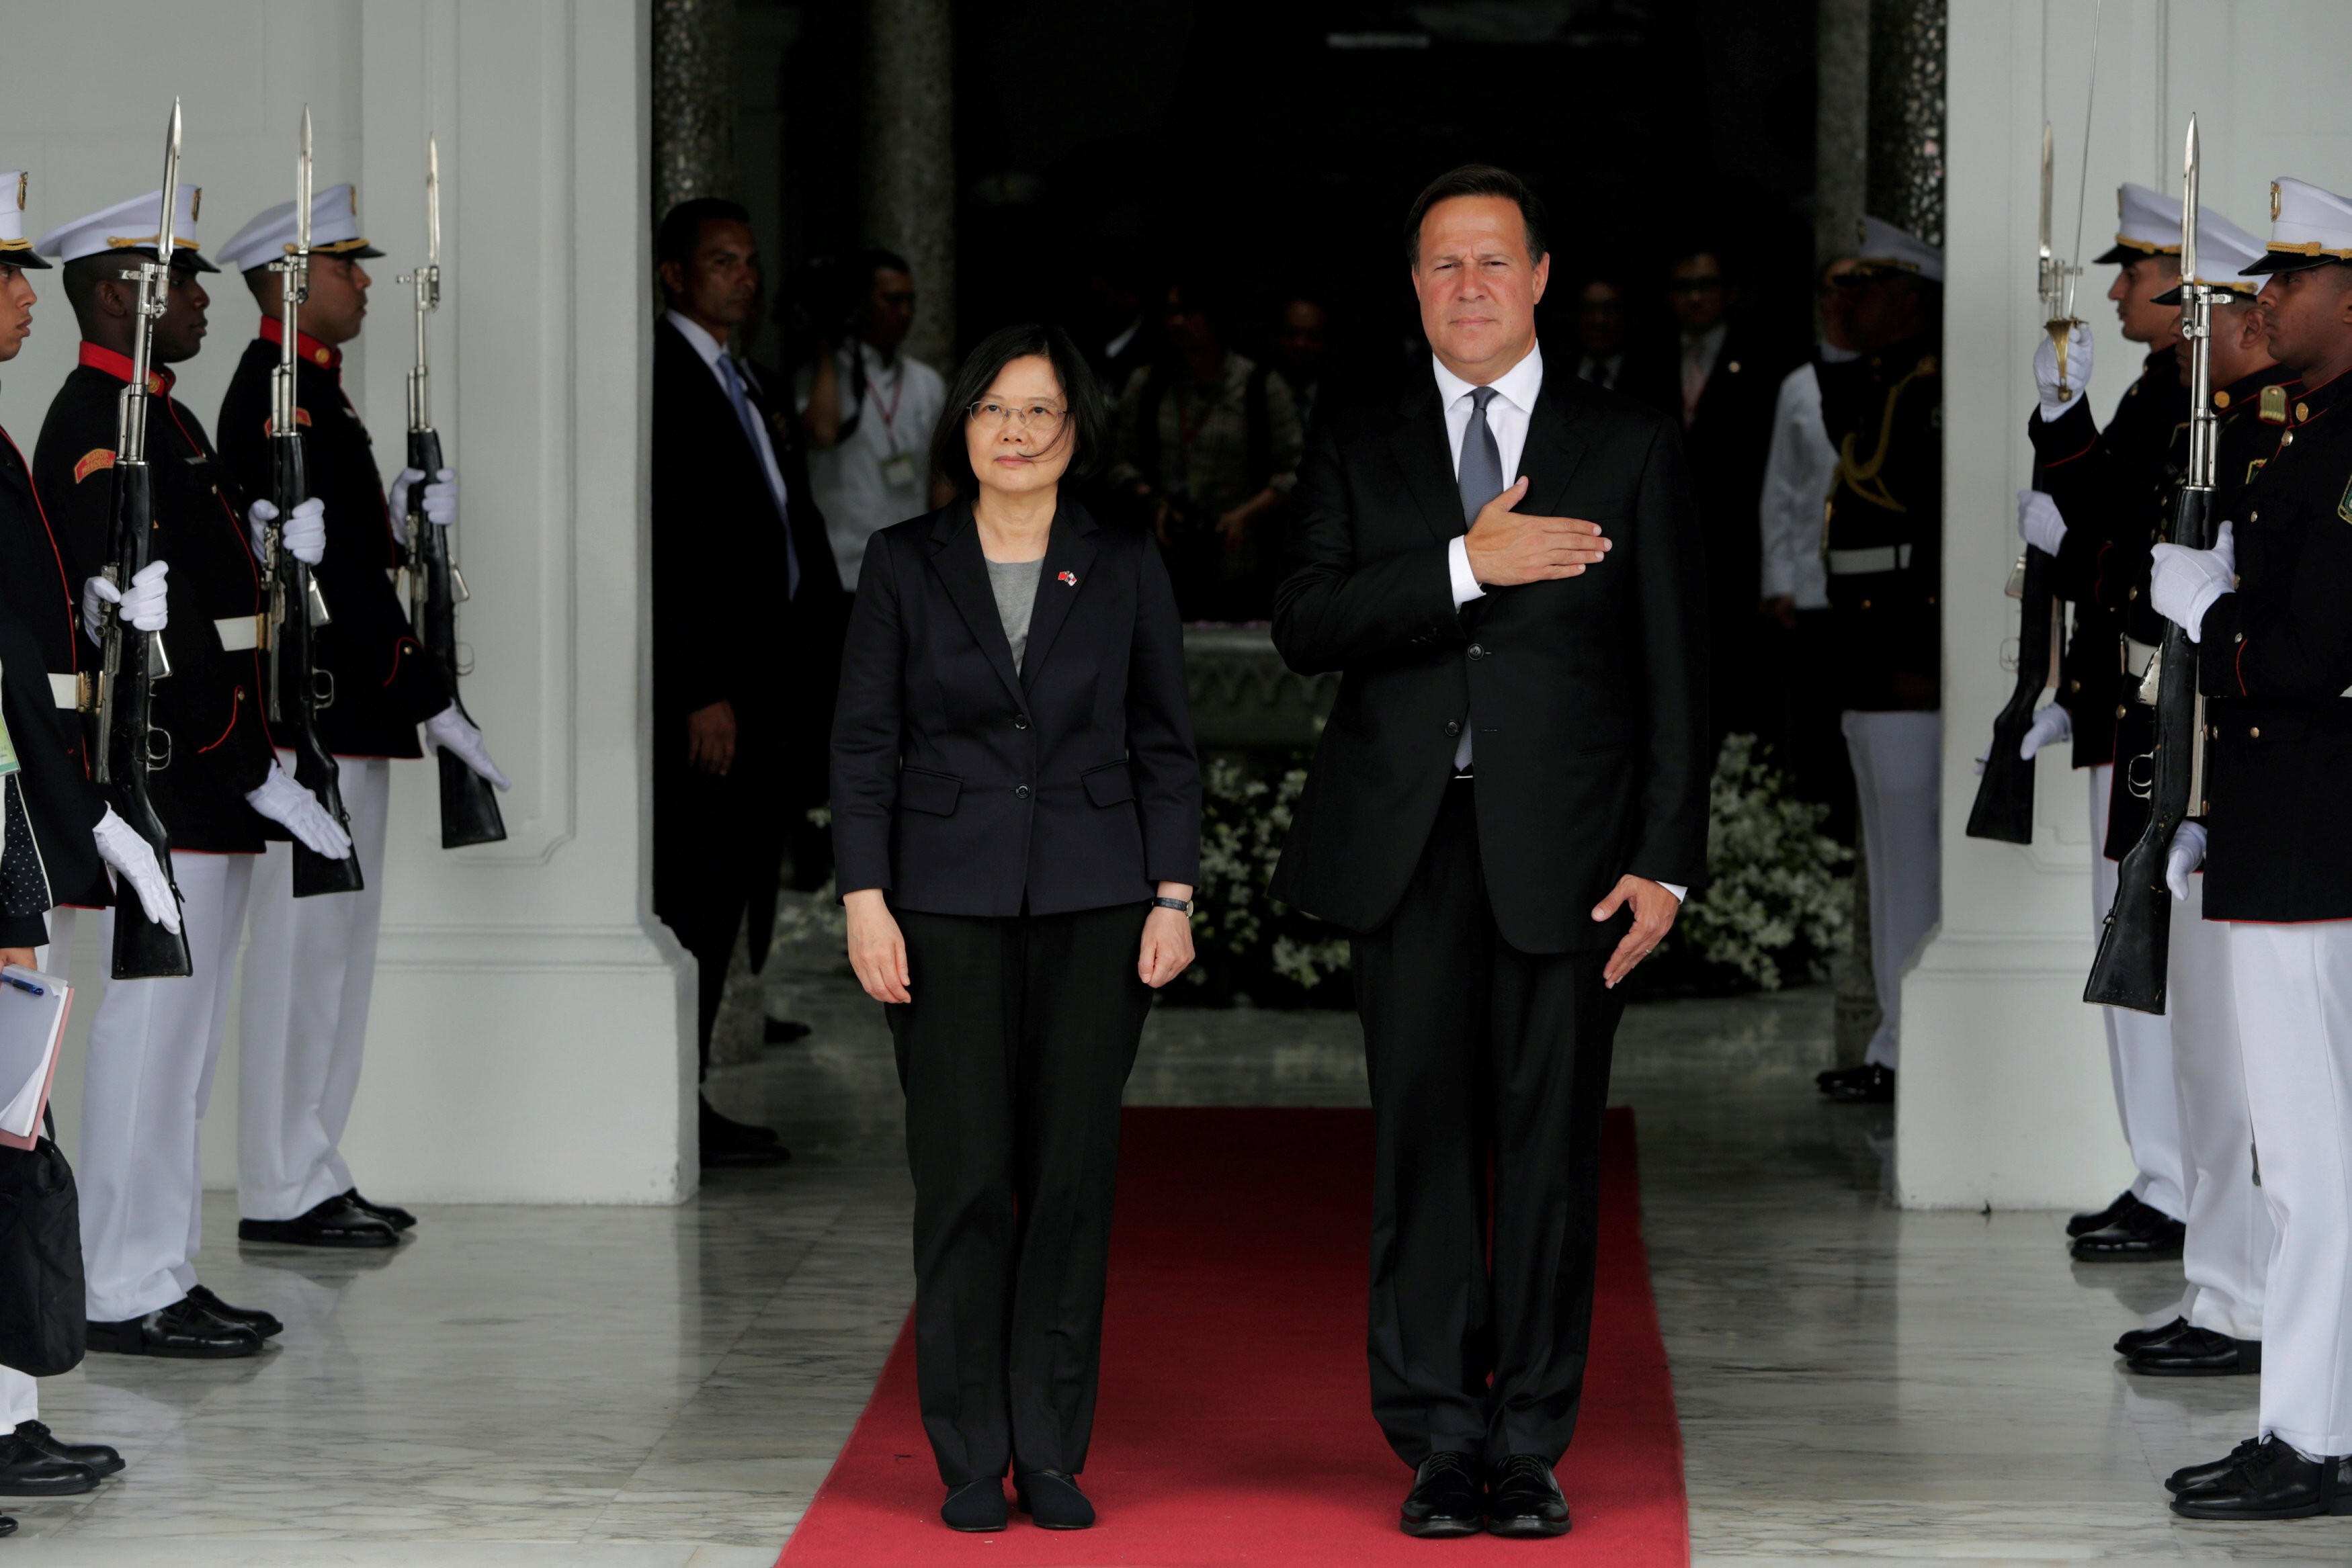 Taiwan’s leader Tsai Ing-wen and former president of Panama Juan Carlos Varela listen to Panama’s national anthem during a welcome ceremony before a meeting in Panama City in June 2016. Panama has since opted to establish diplomatic relations with Beijing, severing its relations with Taipei. Photo: Reuters